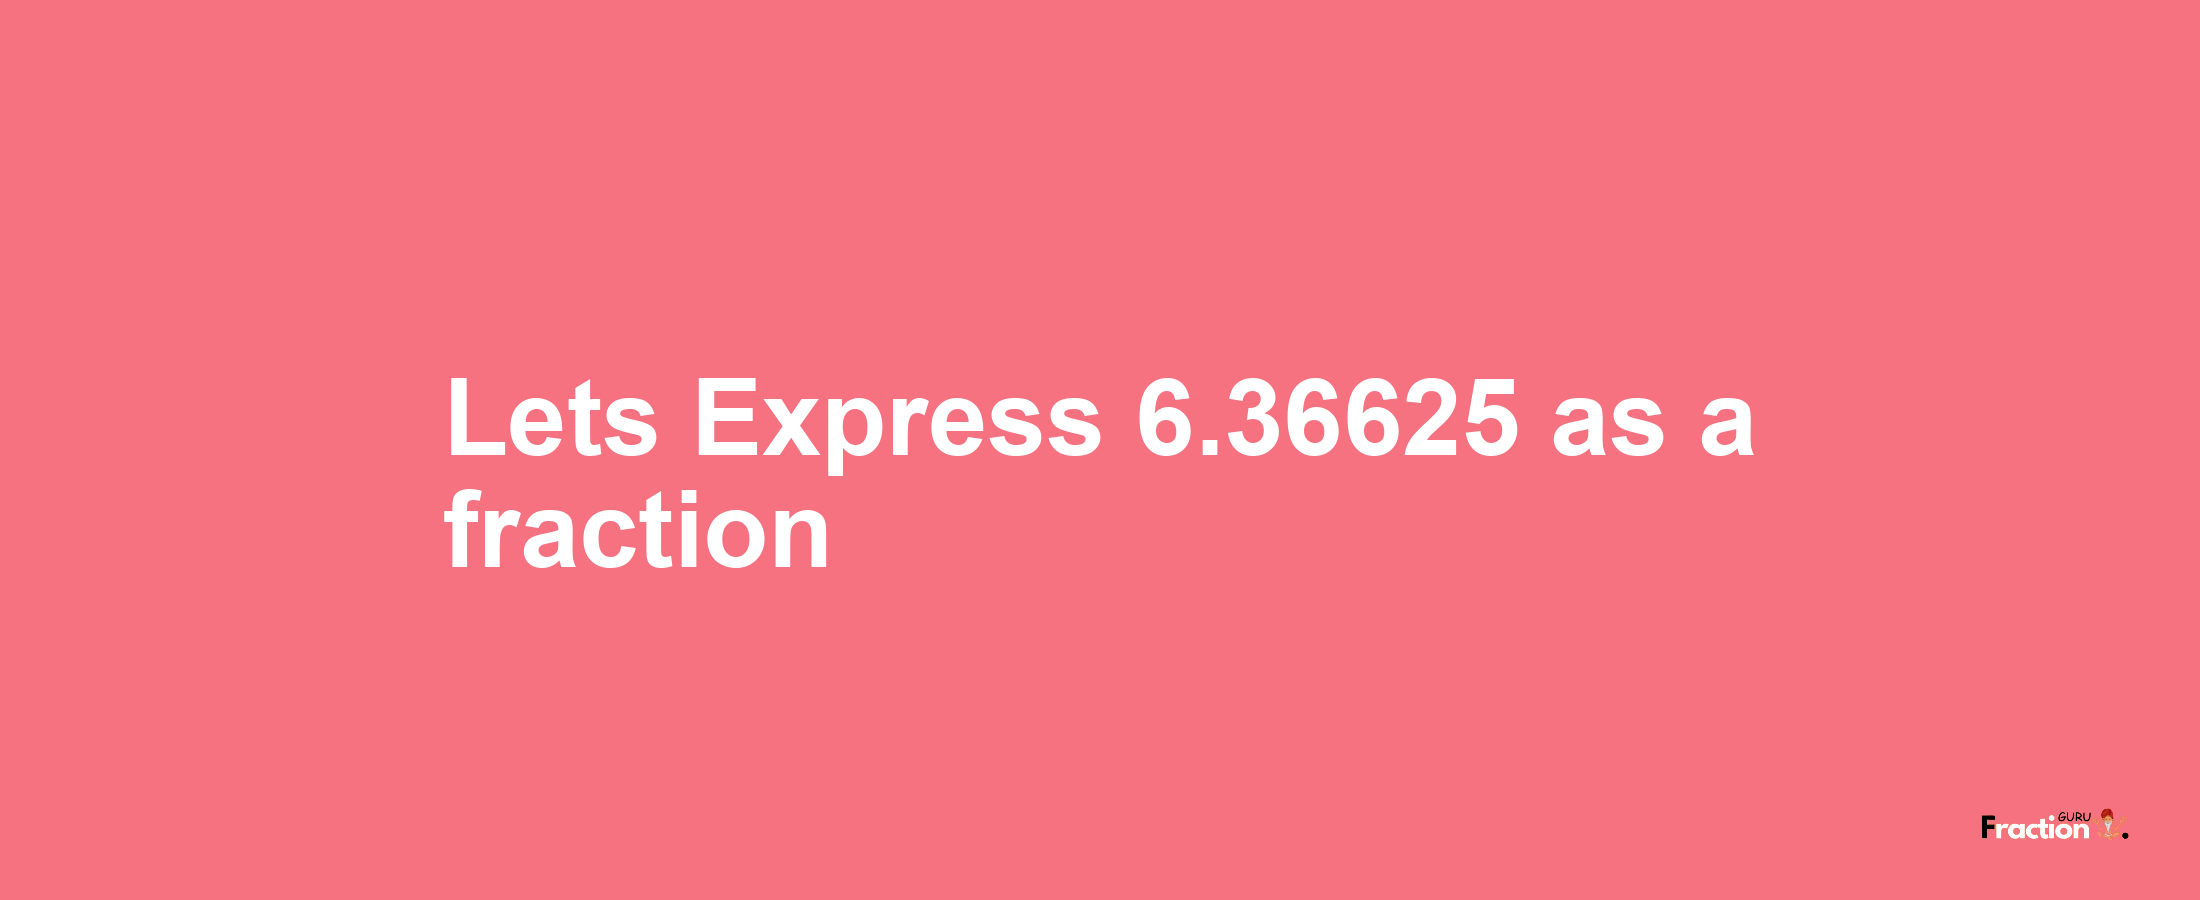 Lets Express 6.36625 as afraction